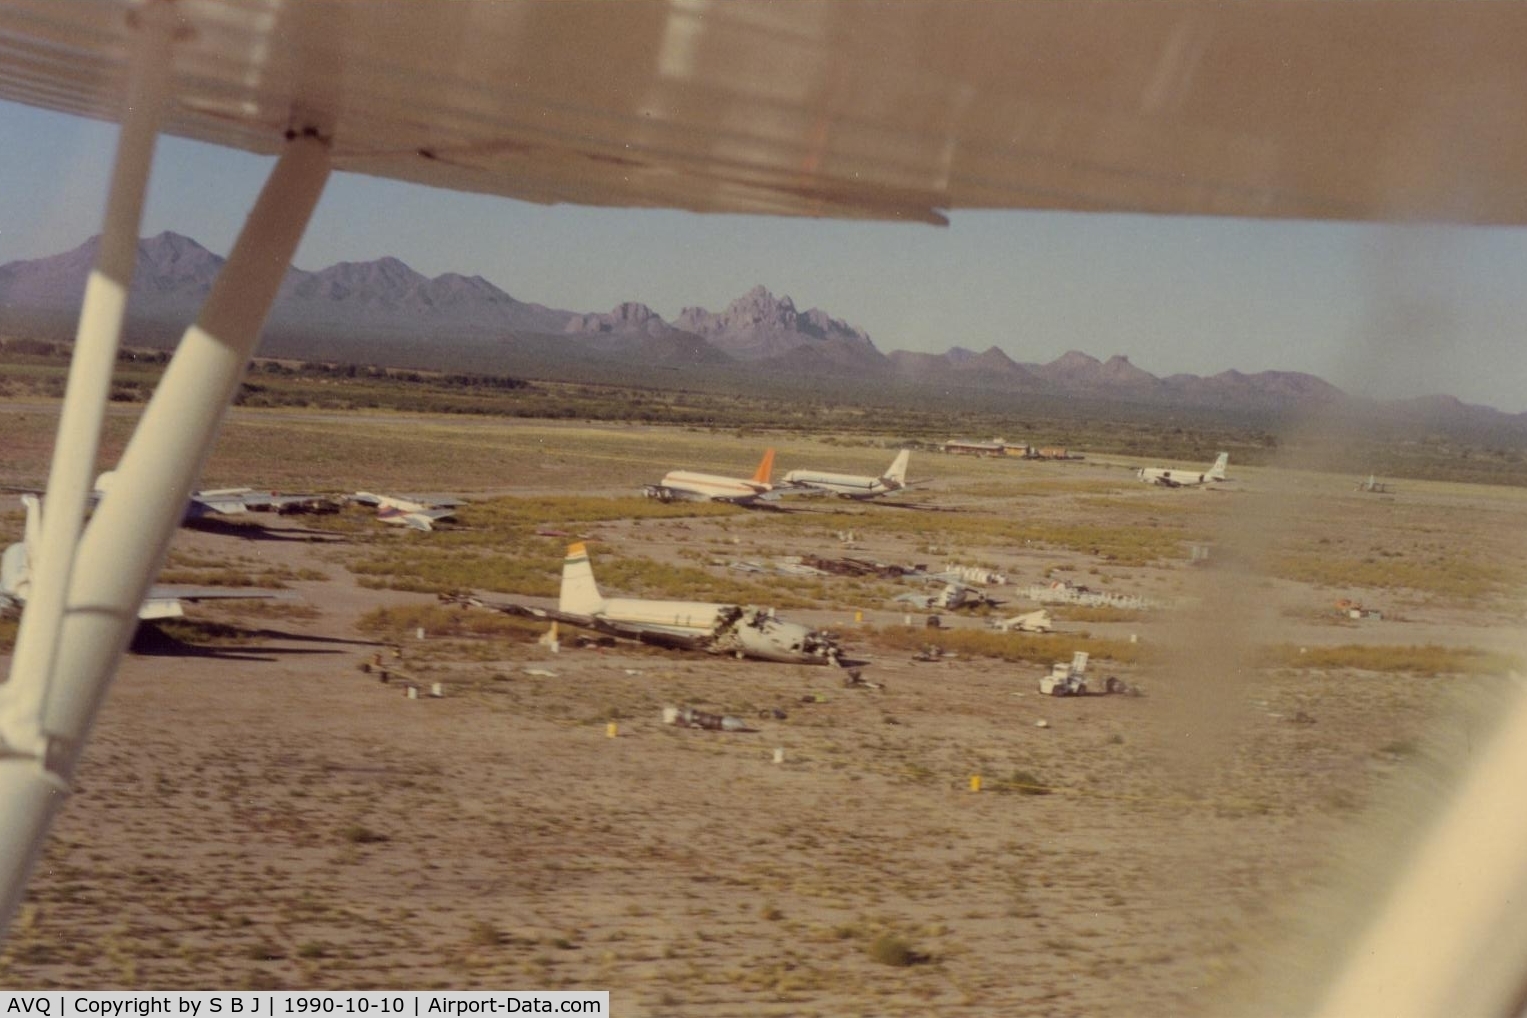 Marana Regional Airport (AVQ) - Marana airport.Sadly, this was a fatal accident for this 707 321B on 9-20-1990. Picture was taken not long after accident.